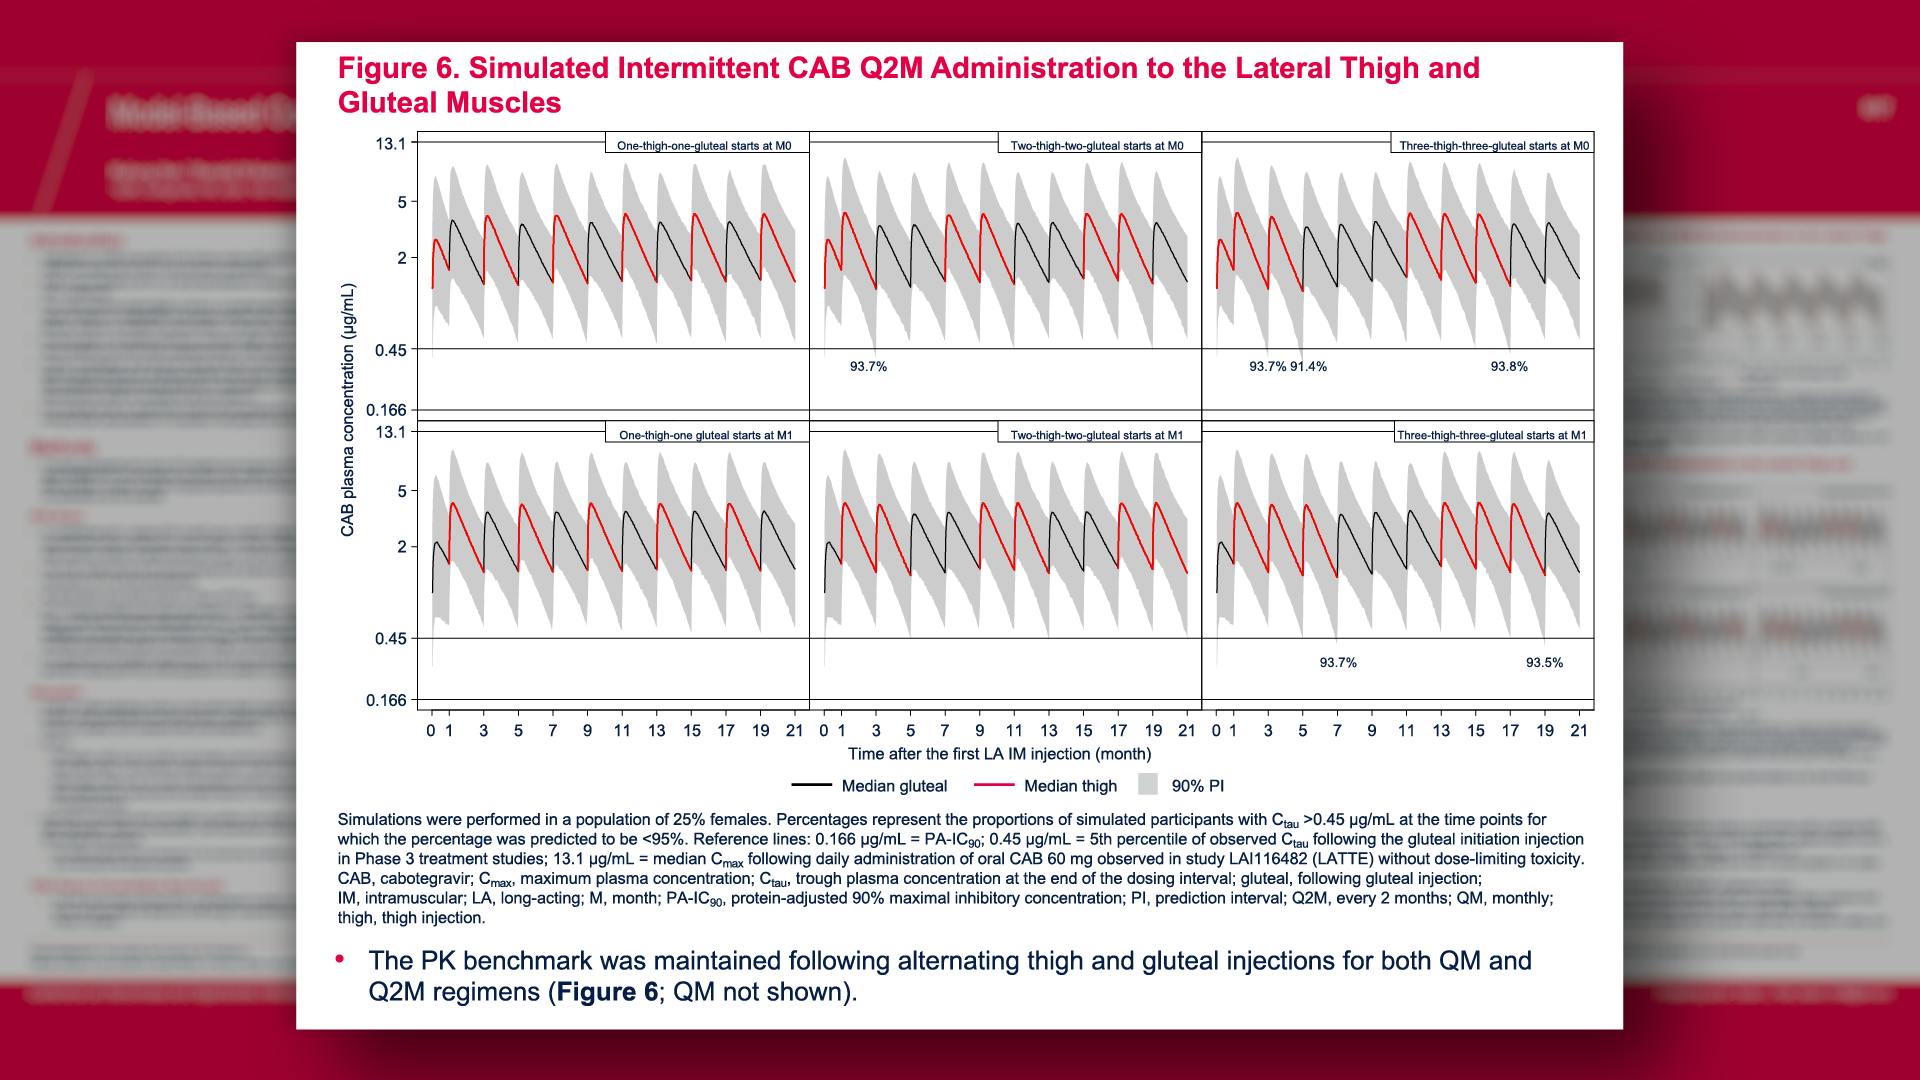 Simulated Intermittent CAB Q2M Administration to the Lateral Thigh and Gluteal Muscles